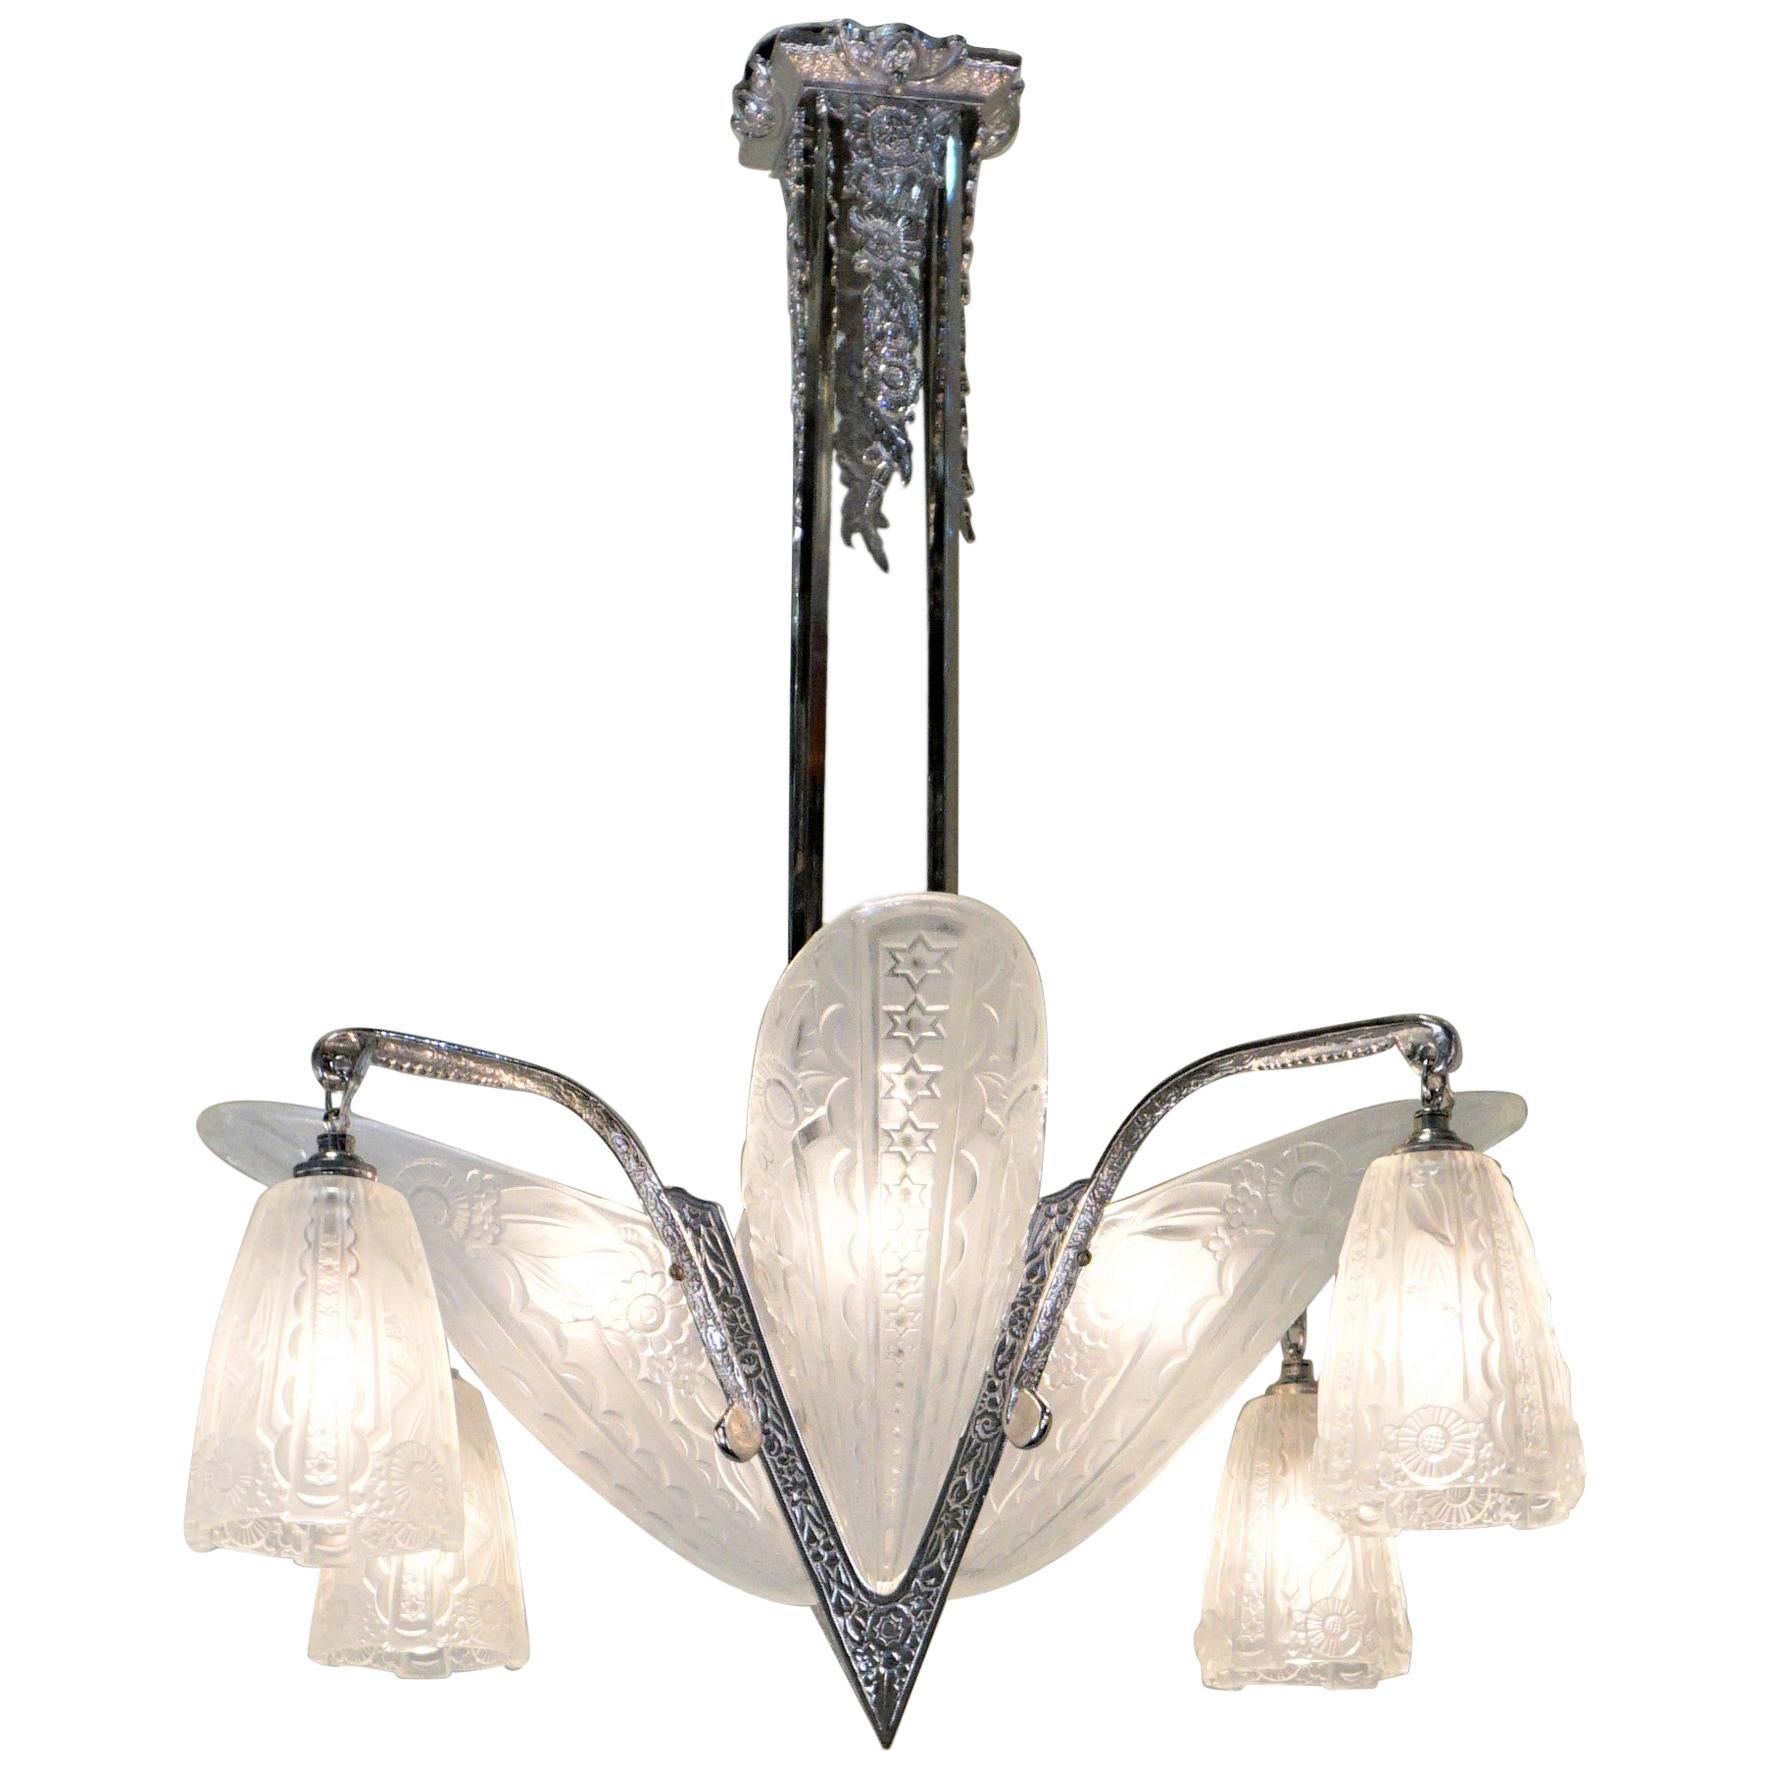 French 1930s Art Deco Chandelier by Donna